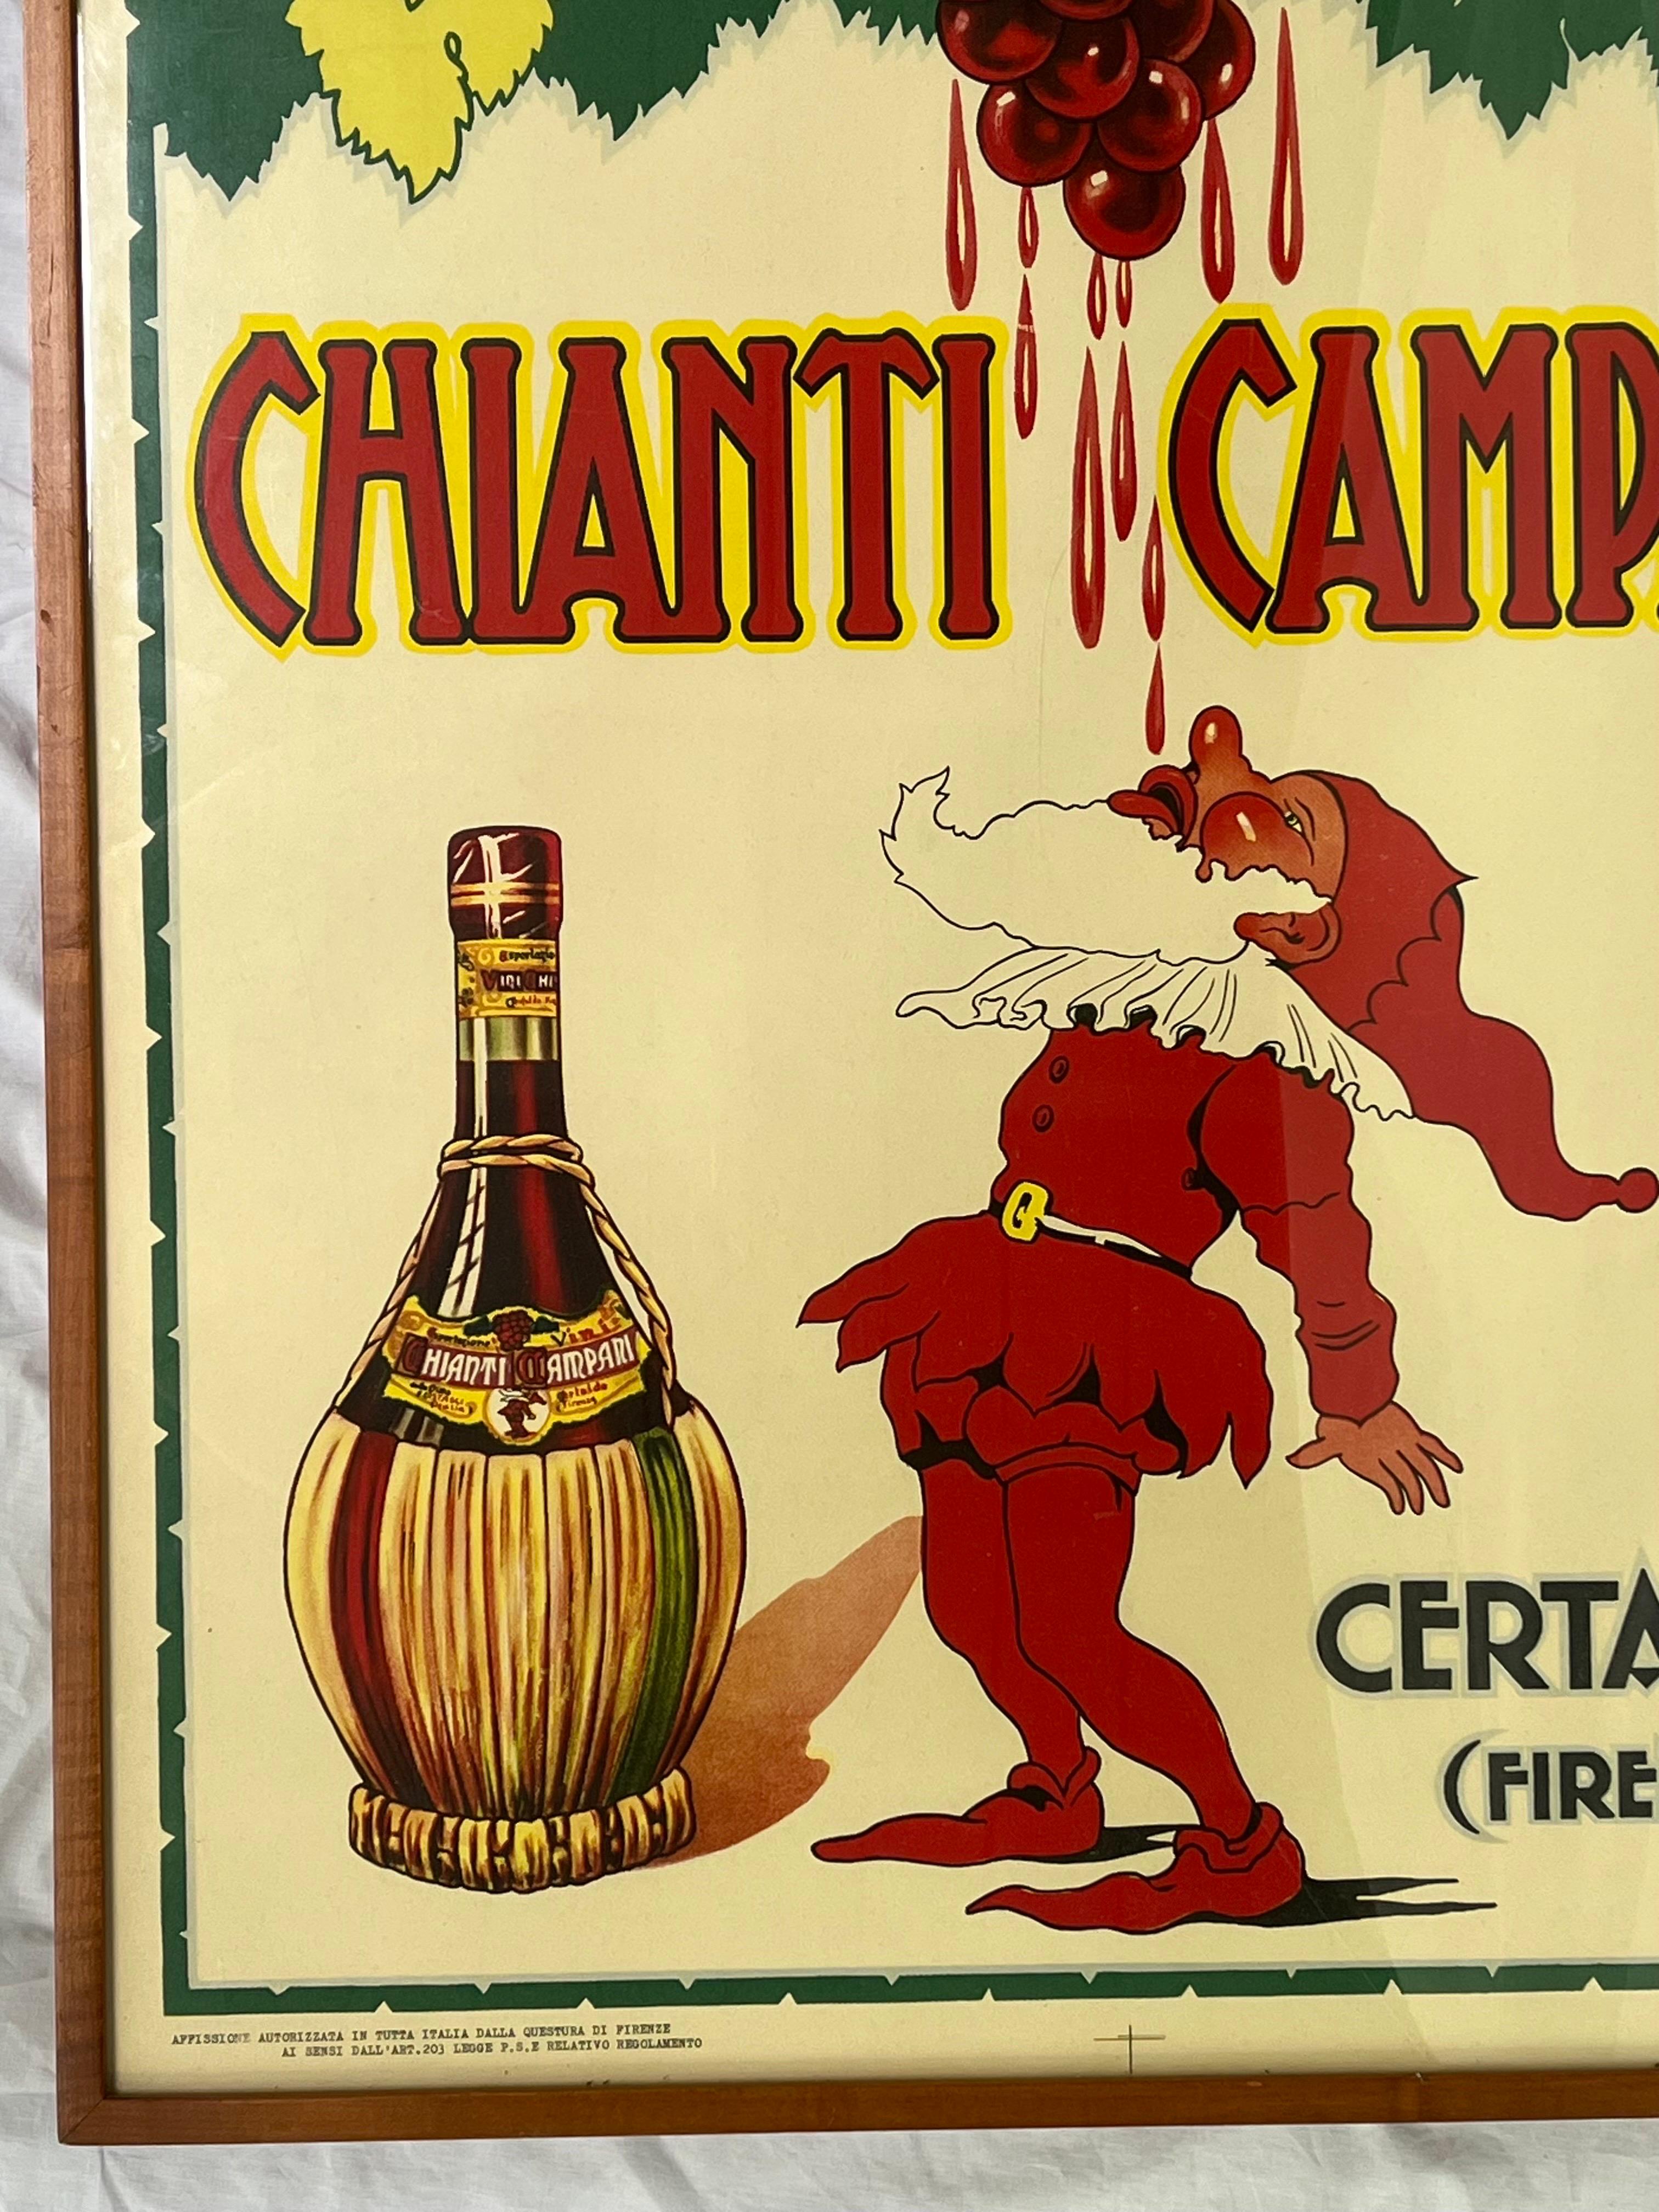 Chianti Campani Vintage Midcentury Italian Poster Featuring a Gnome and Wine 3